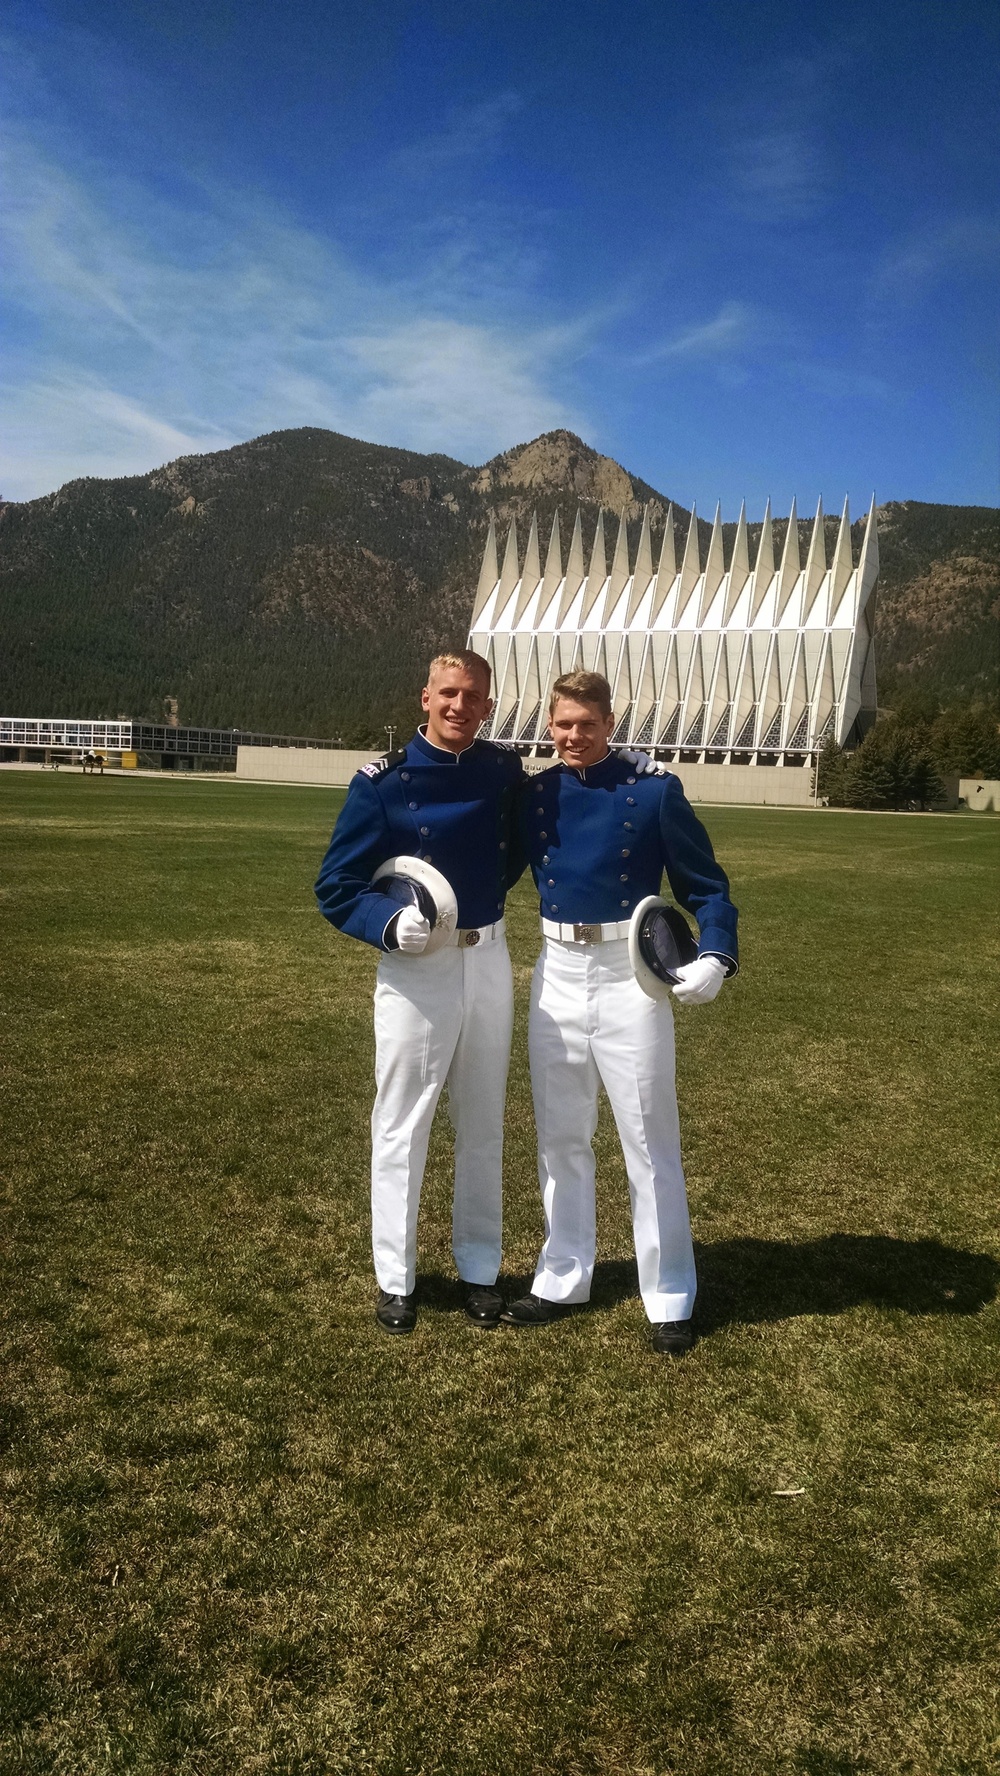 First time: two brothers learn to fly the F-15C in the same class